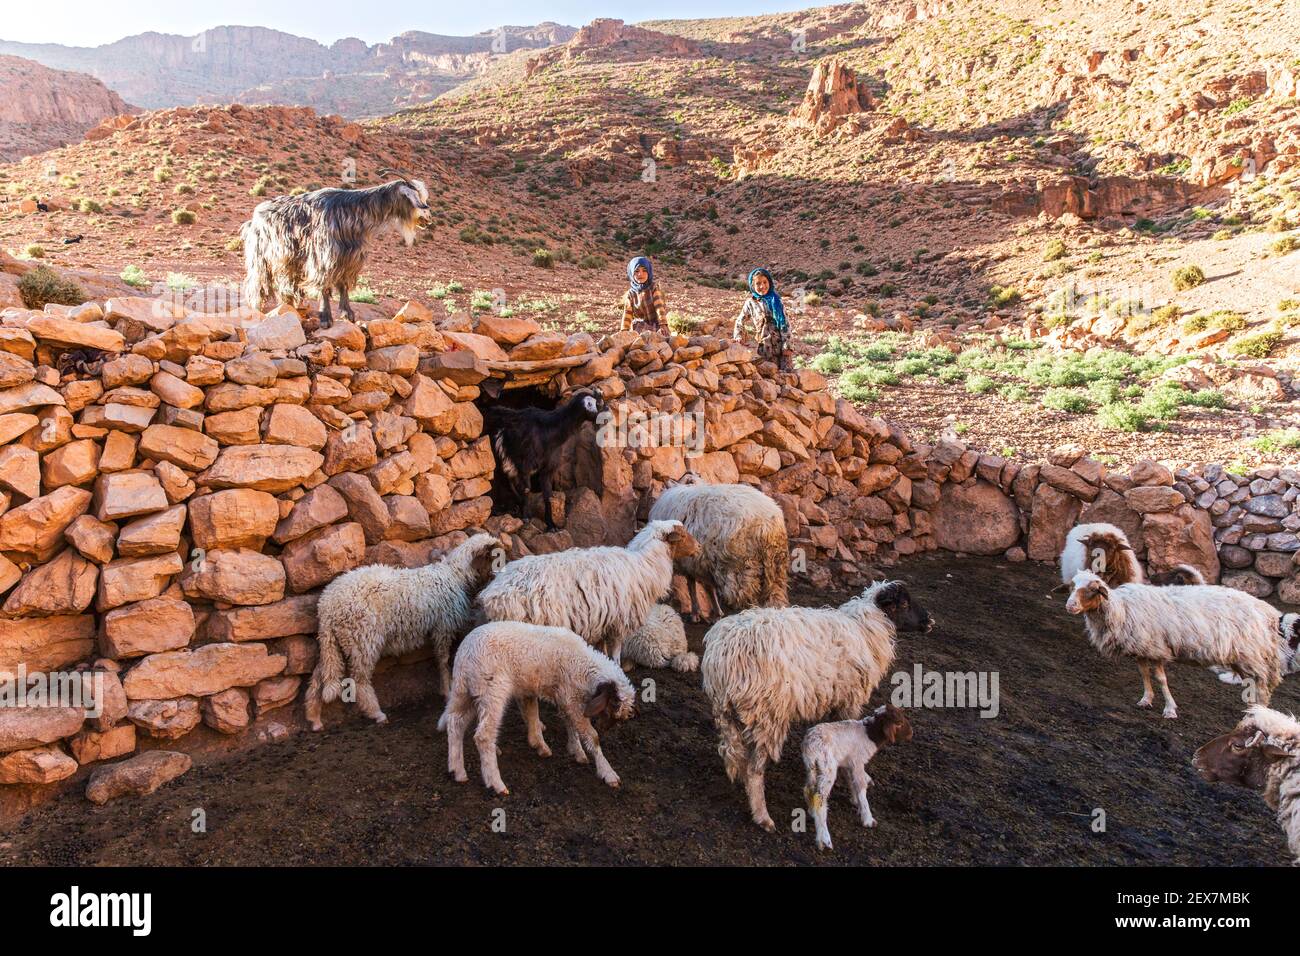 desert environment with stone sheep pen with sheep and nomad children Stock Photo